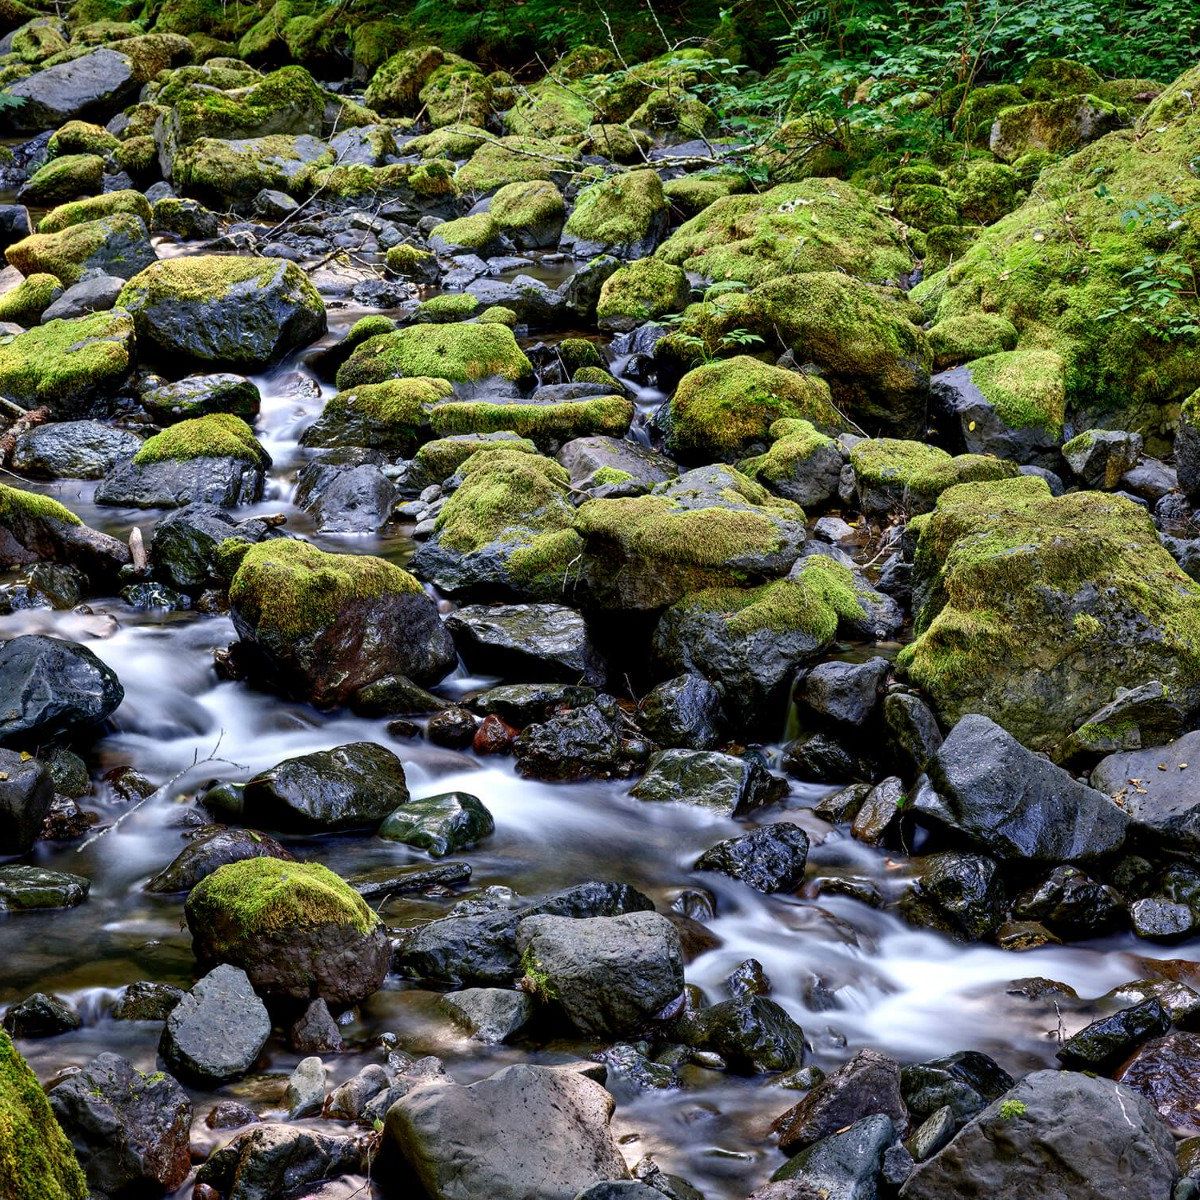 Running water with boulders